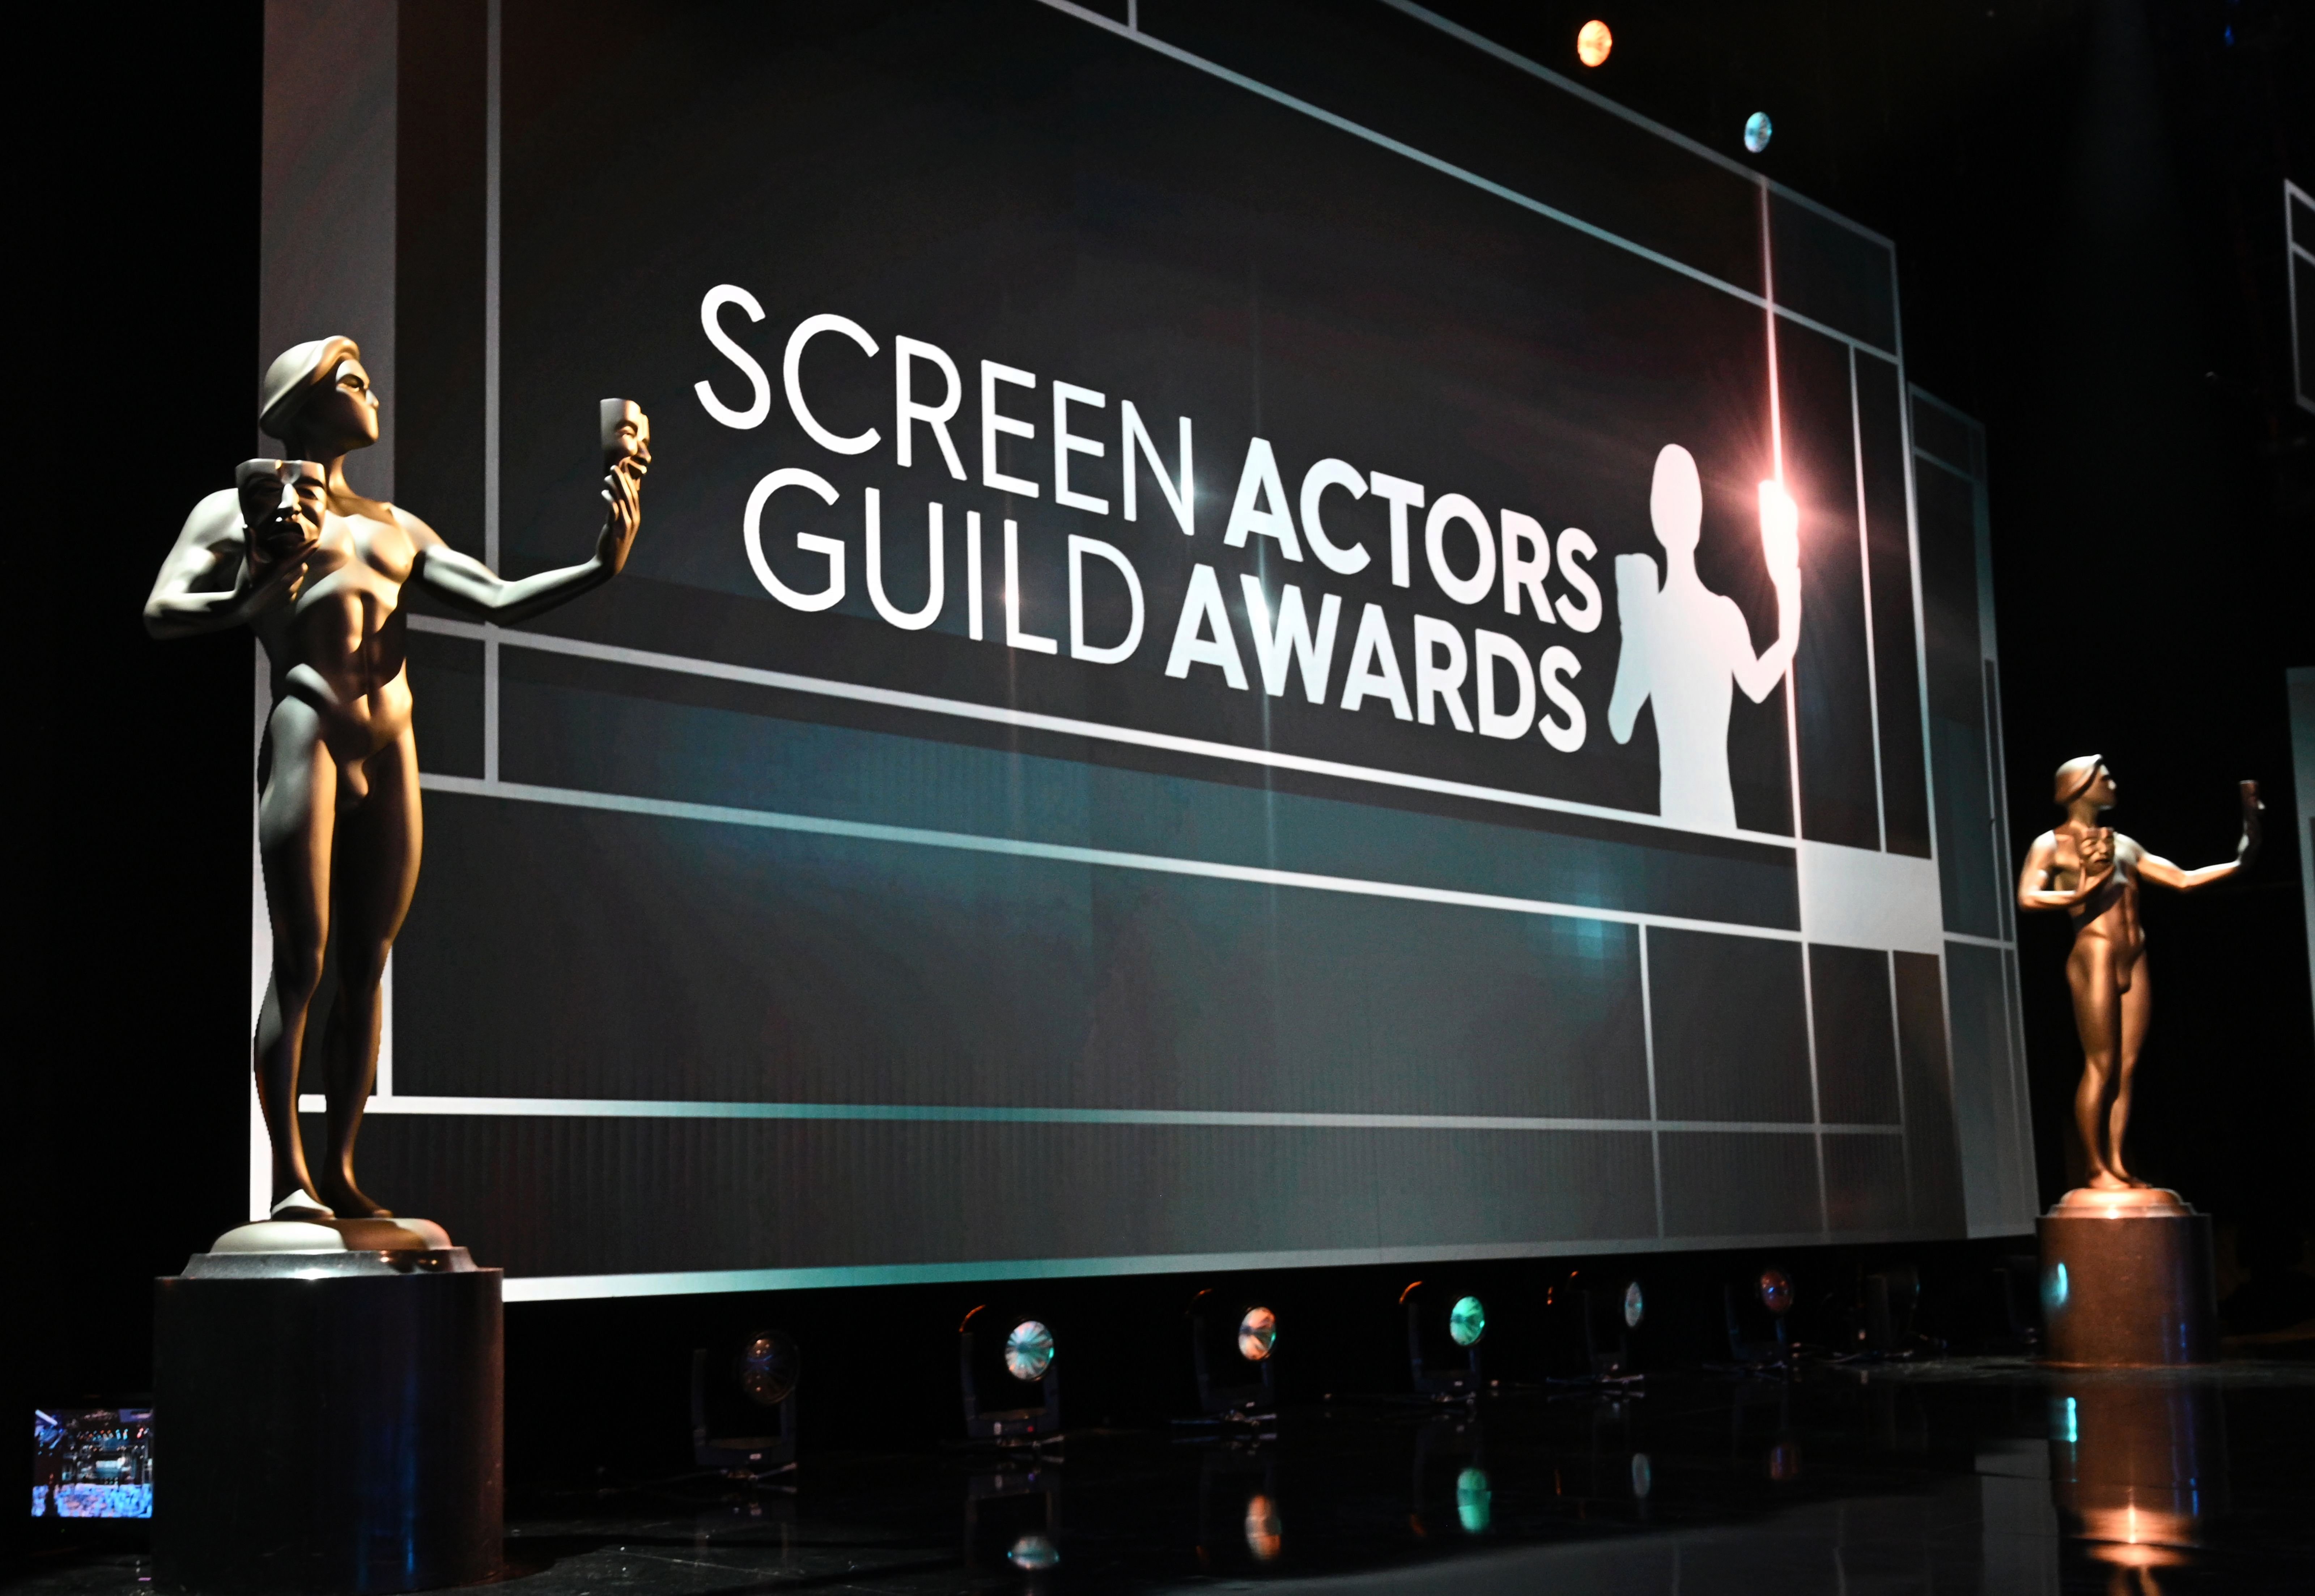 SAG Awards to Return in February 2022 with 2Hour Show NBC Los